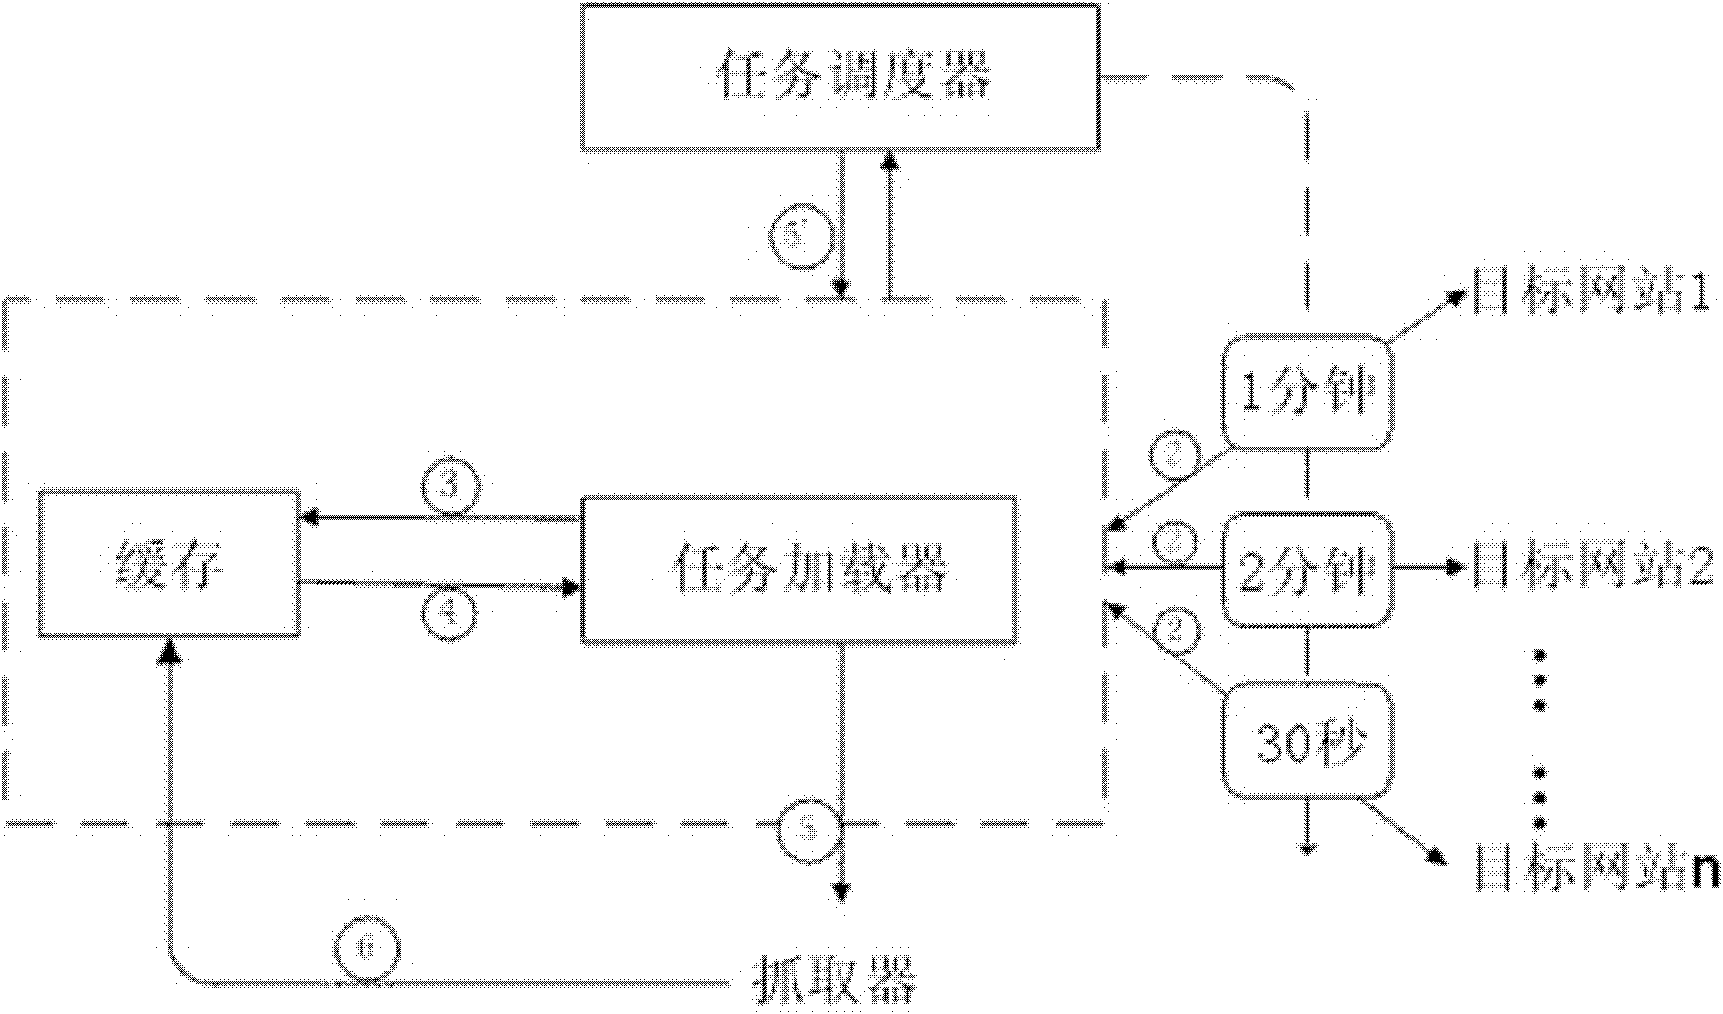 Dynamic network content grabbing method and dynamic network content crawler system